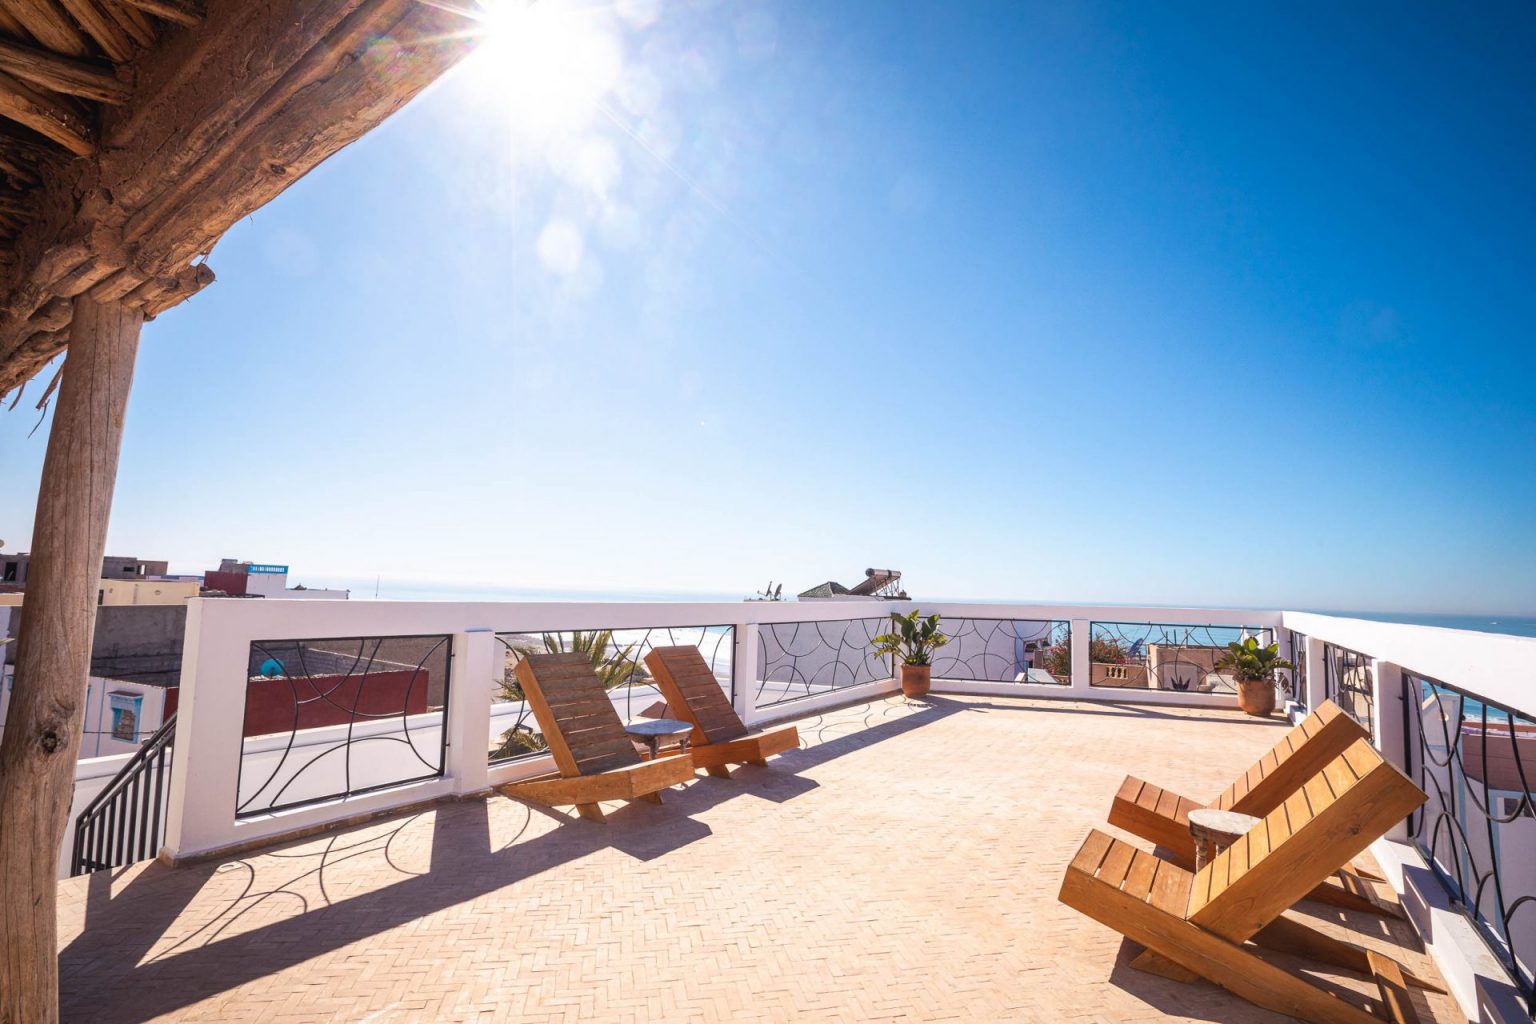 Stay at Surf House Morocco With Its 180° sea view rooftop terrace